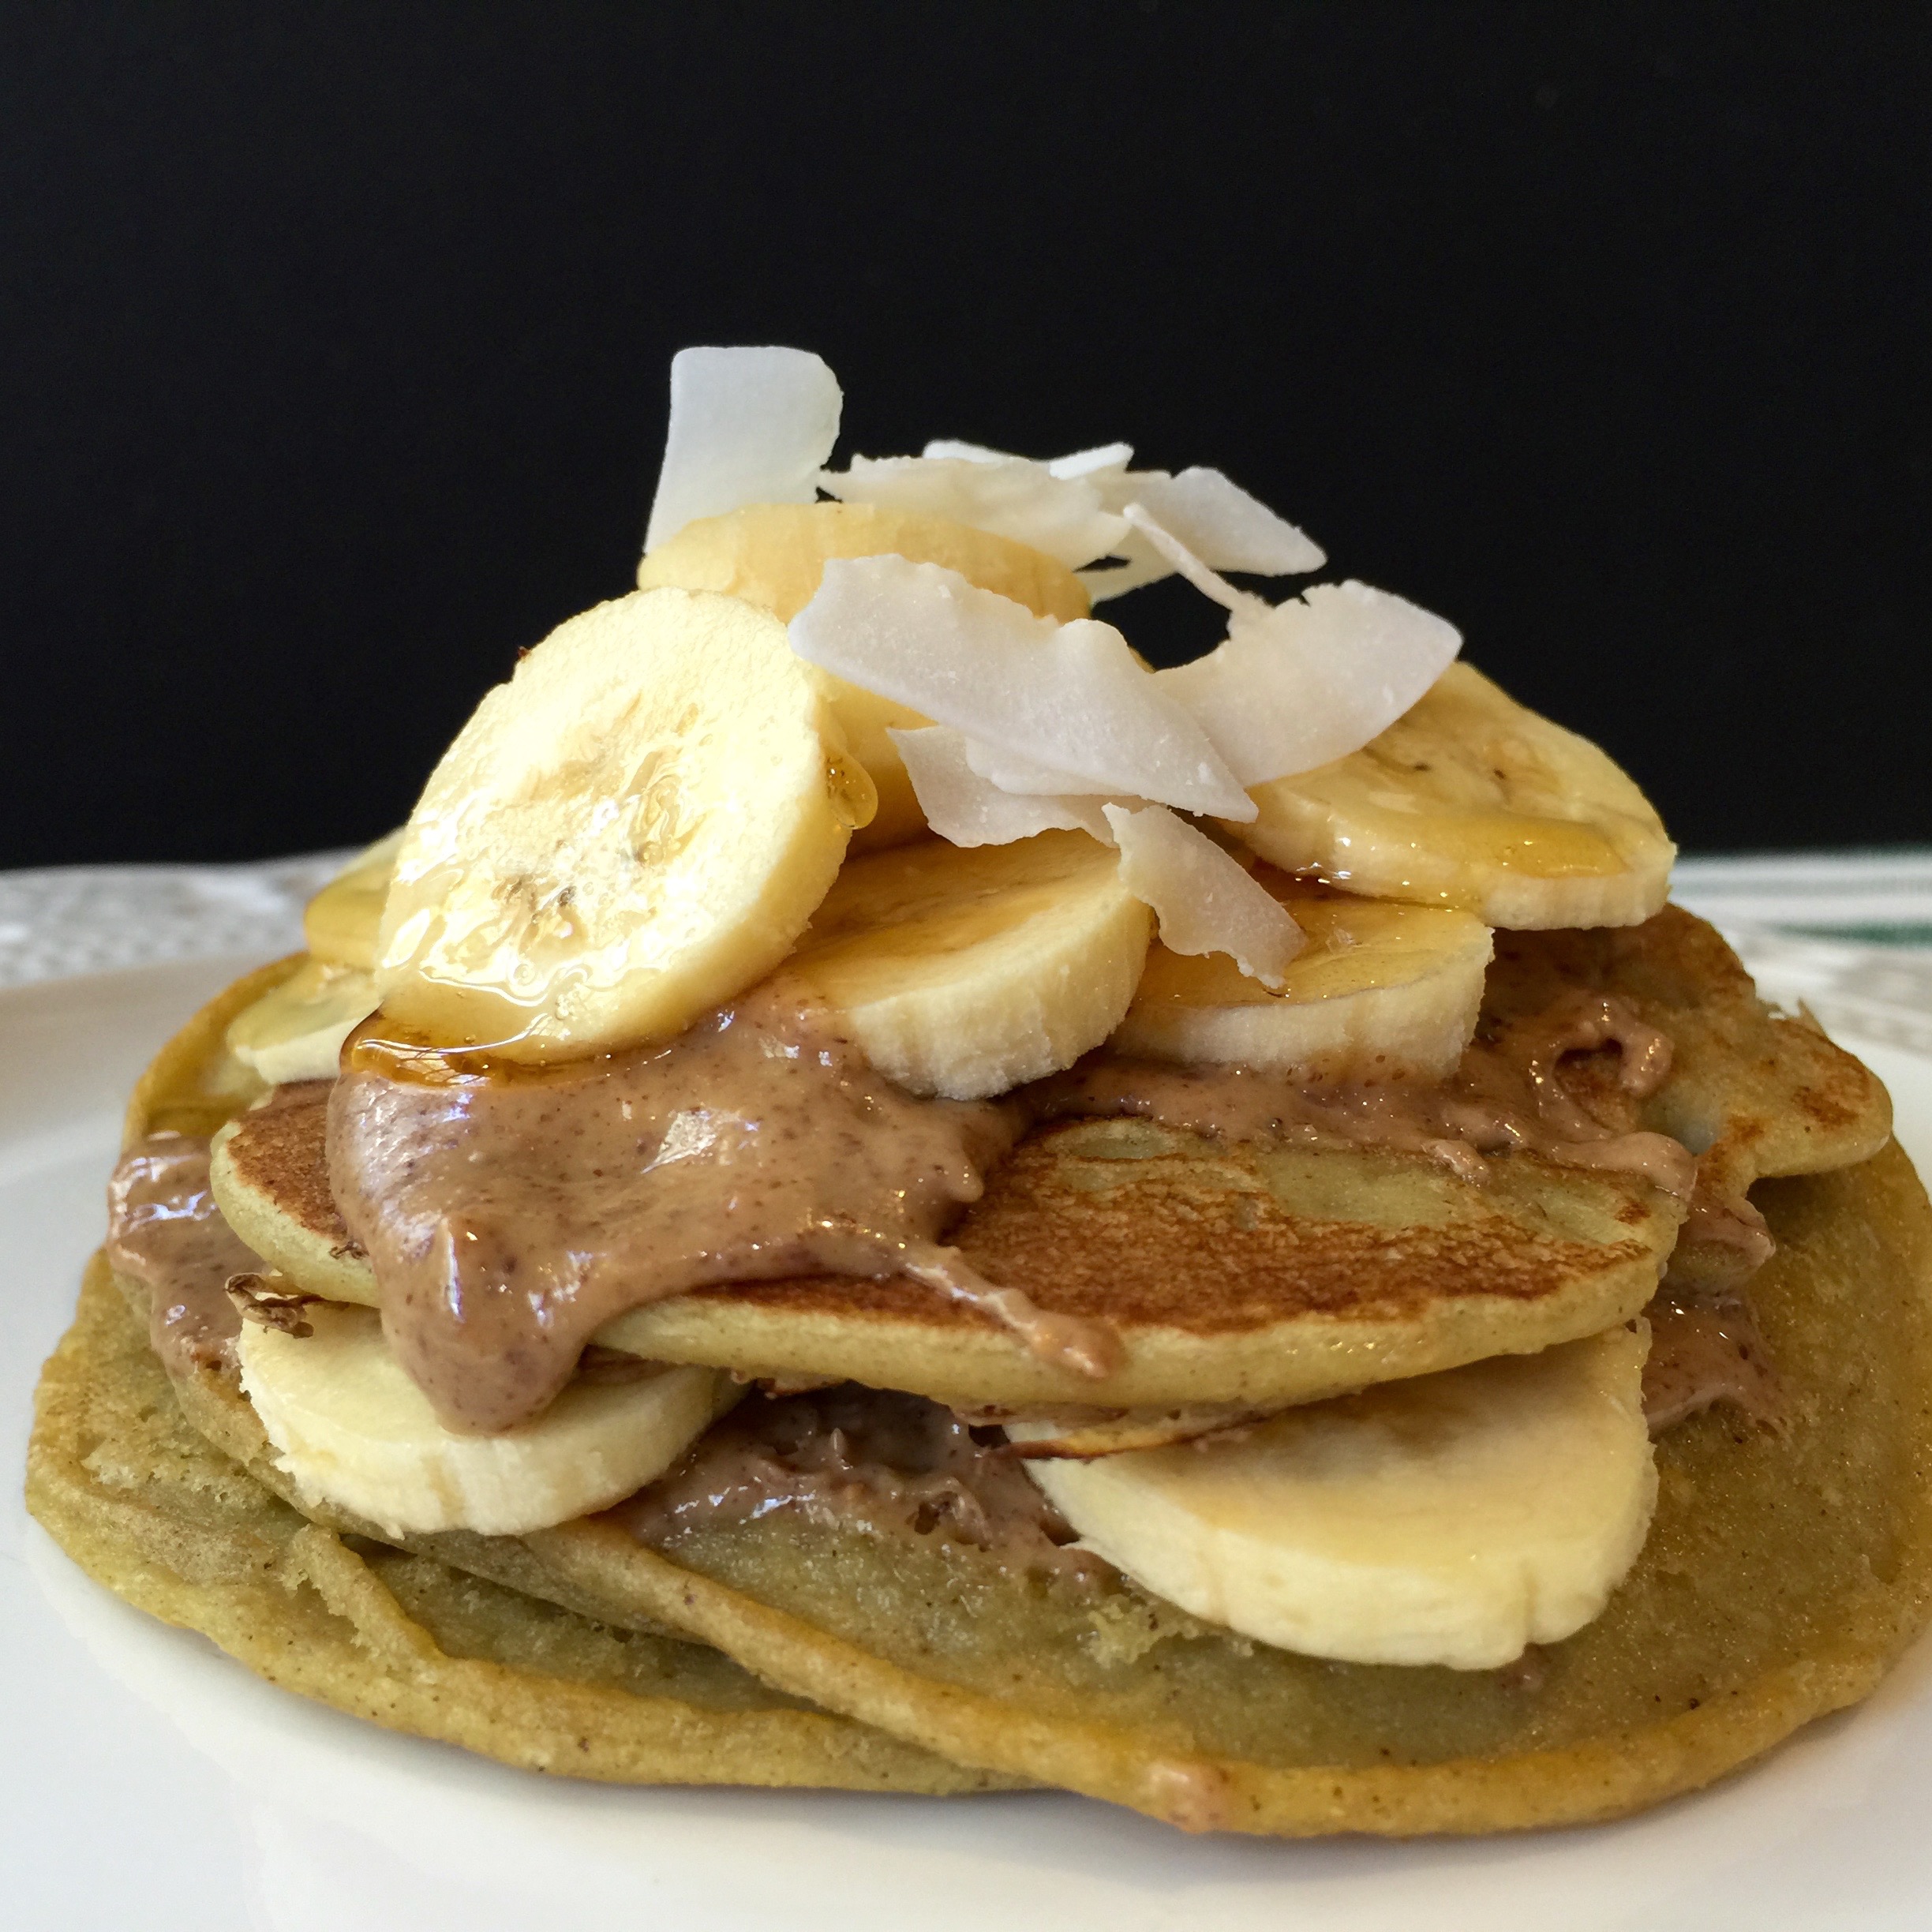 Chickpea pancakes with almond butter & banana